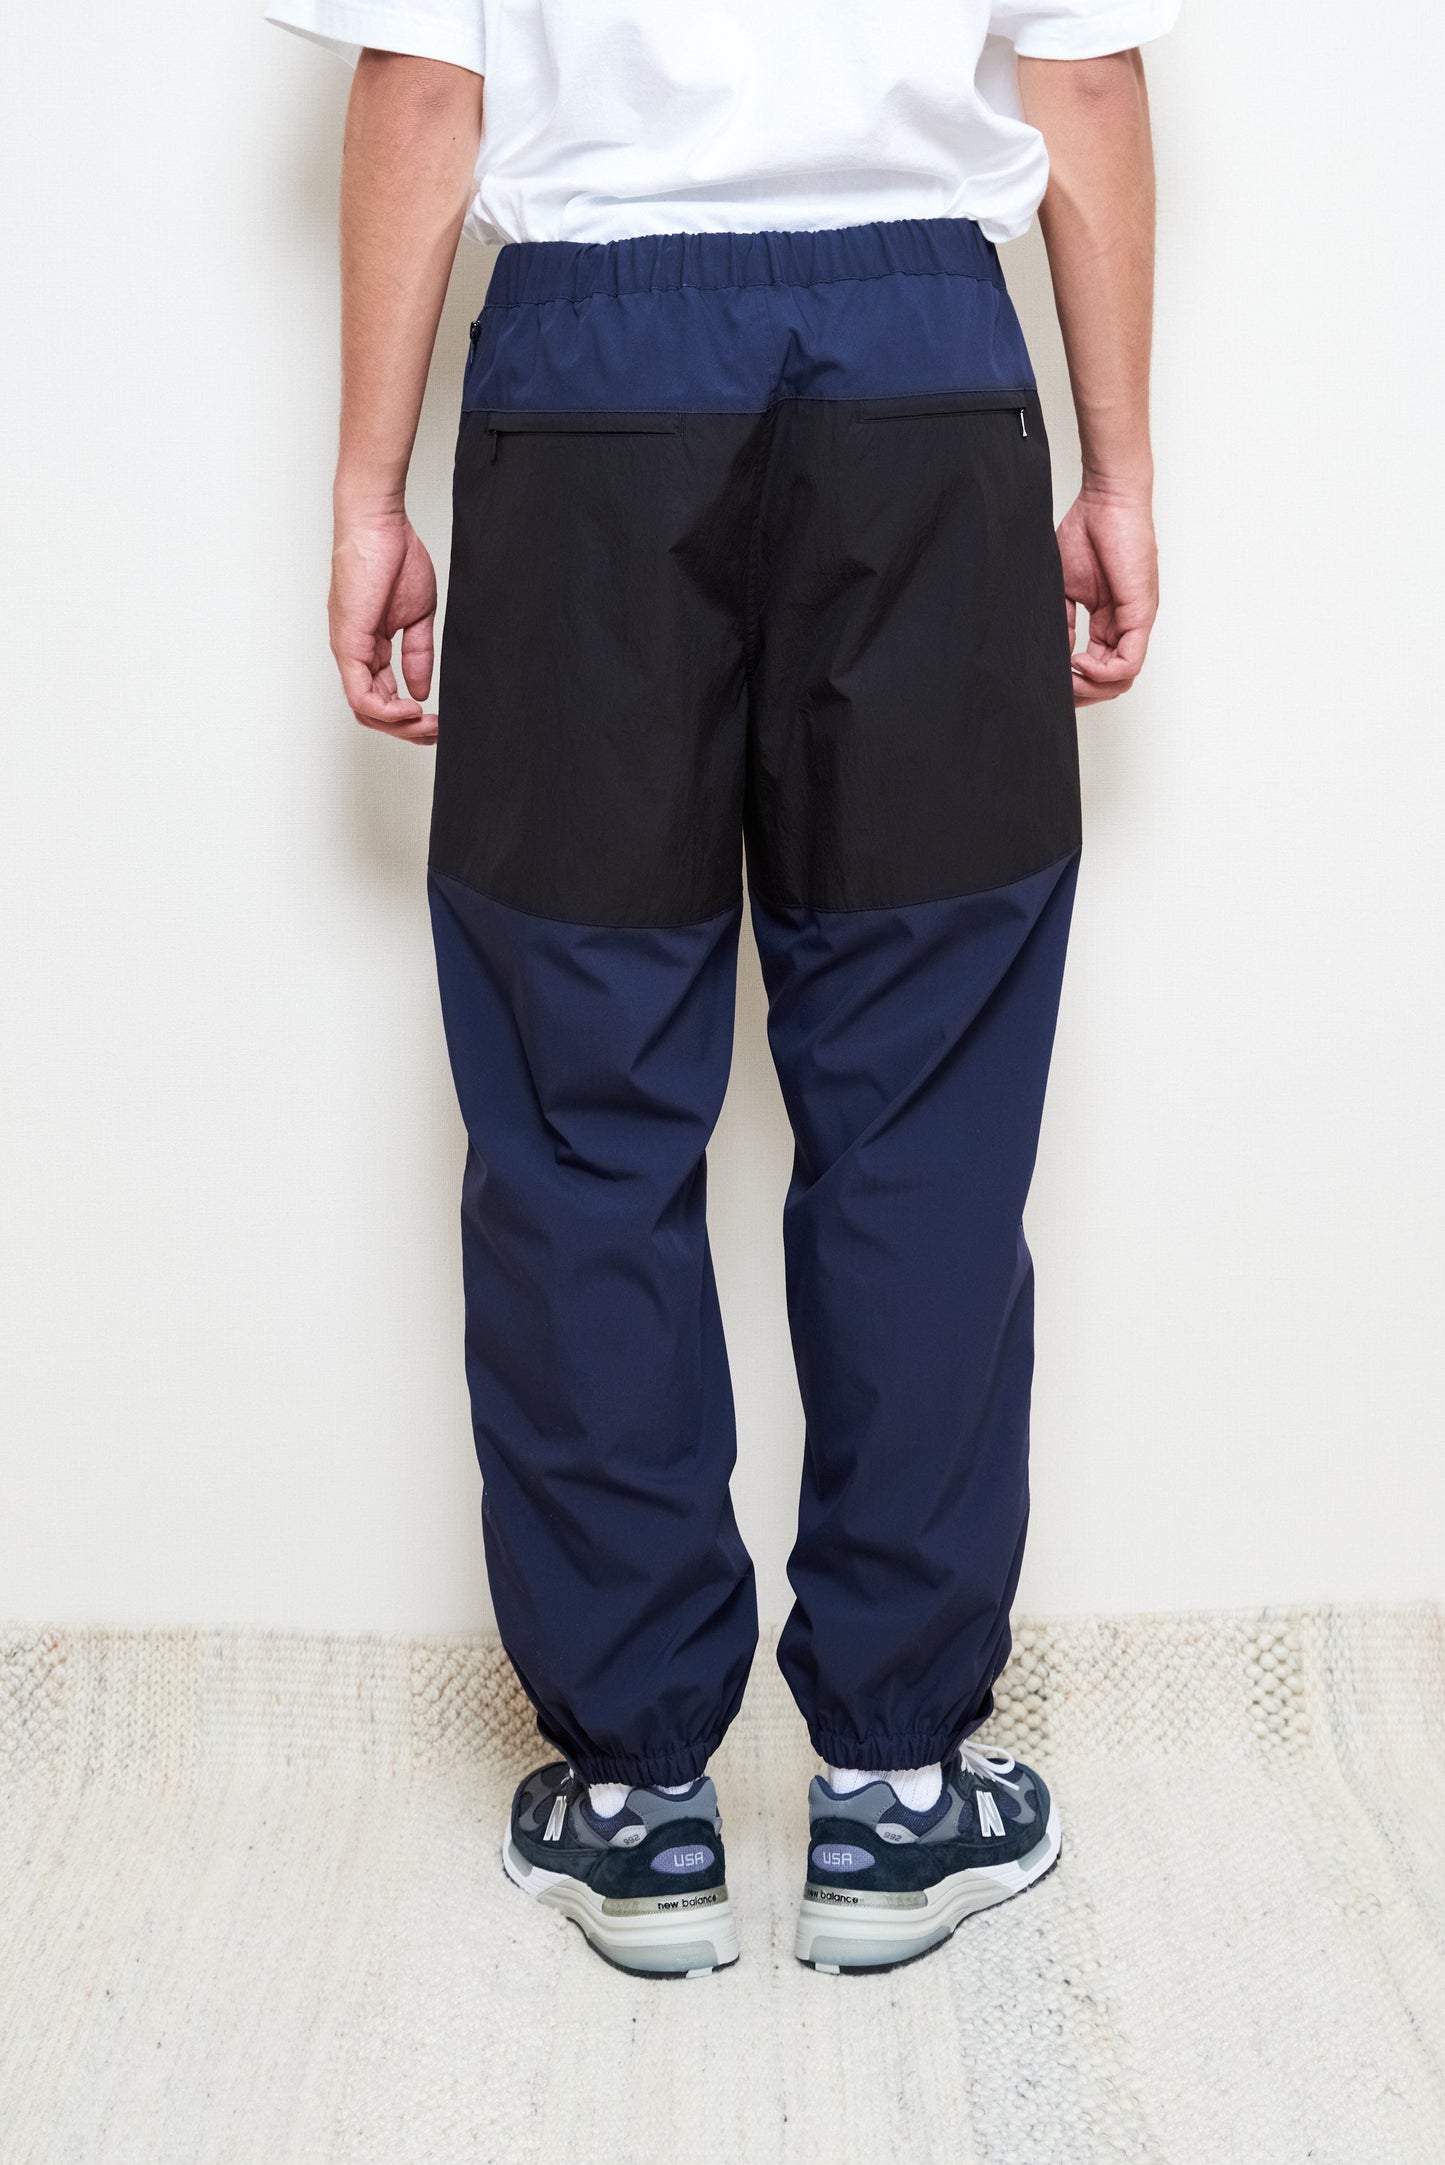 THE HOLY MOUNTAIN VENTILATION PANTS is-ness online shop 5